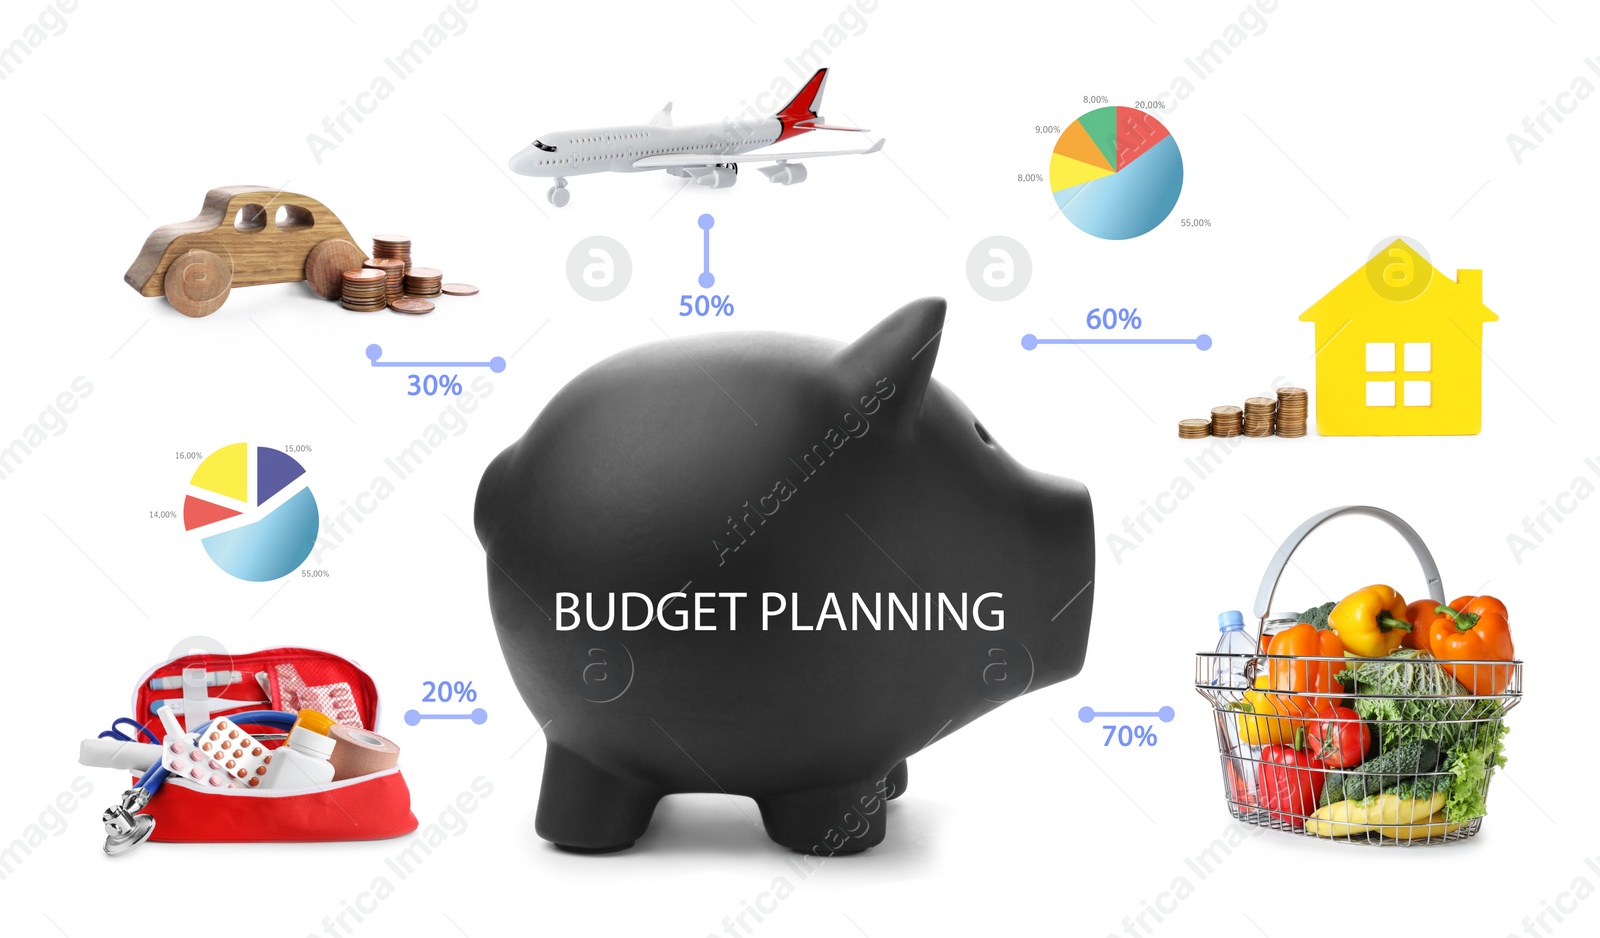 Image of Budget planning. Piggy bank and different expenses